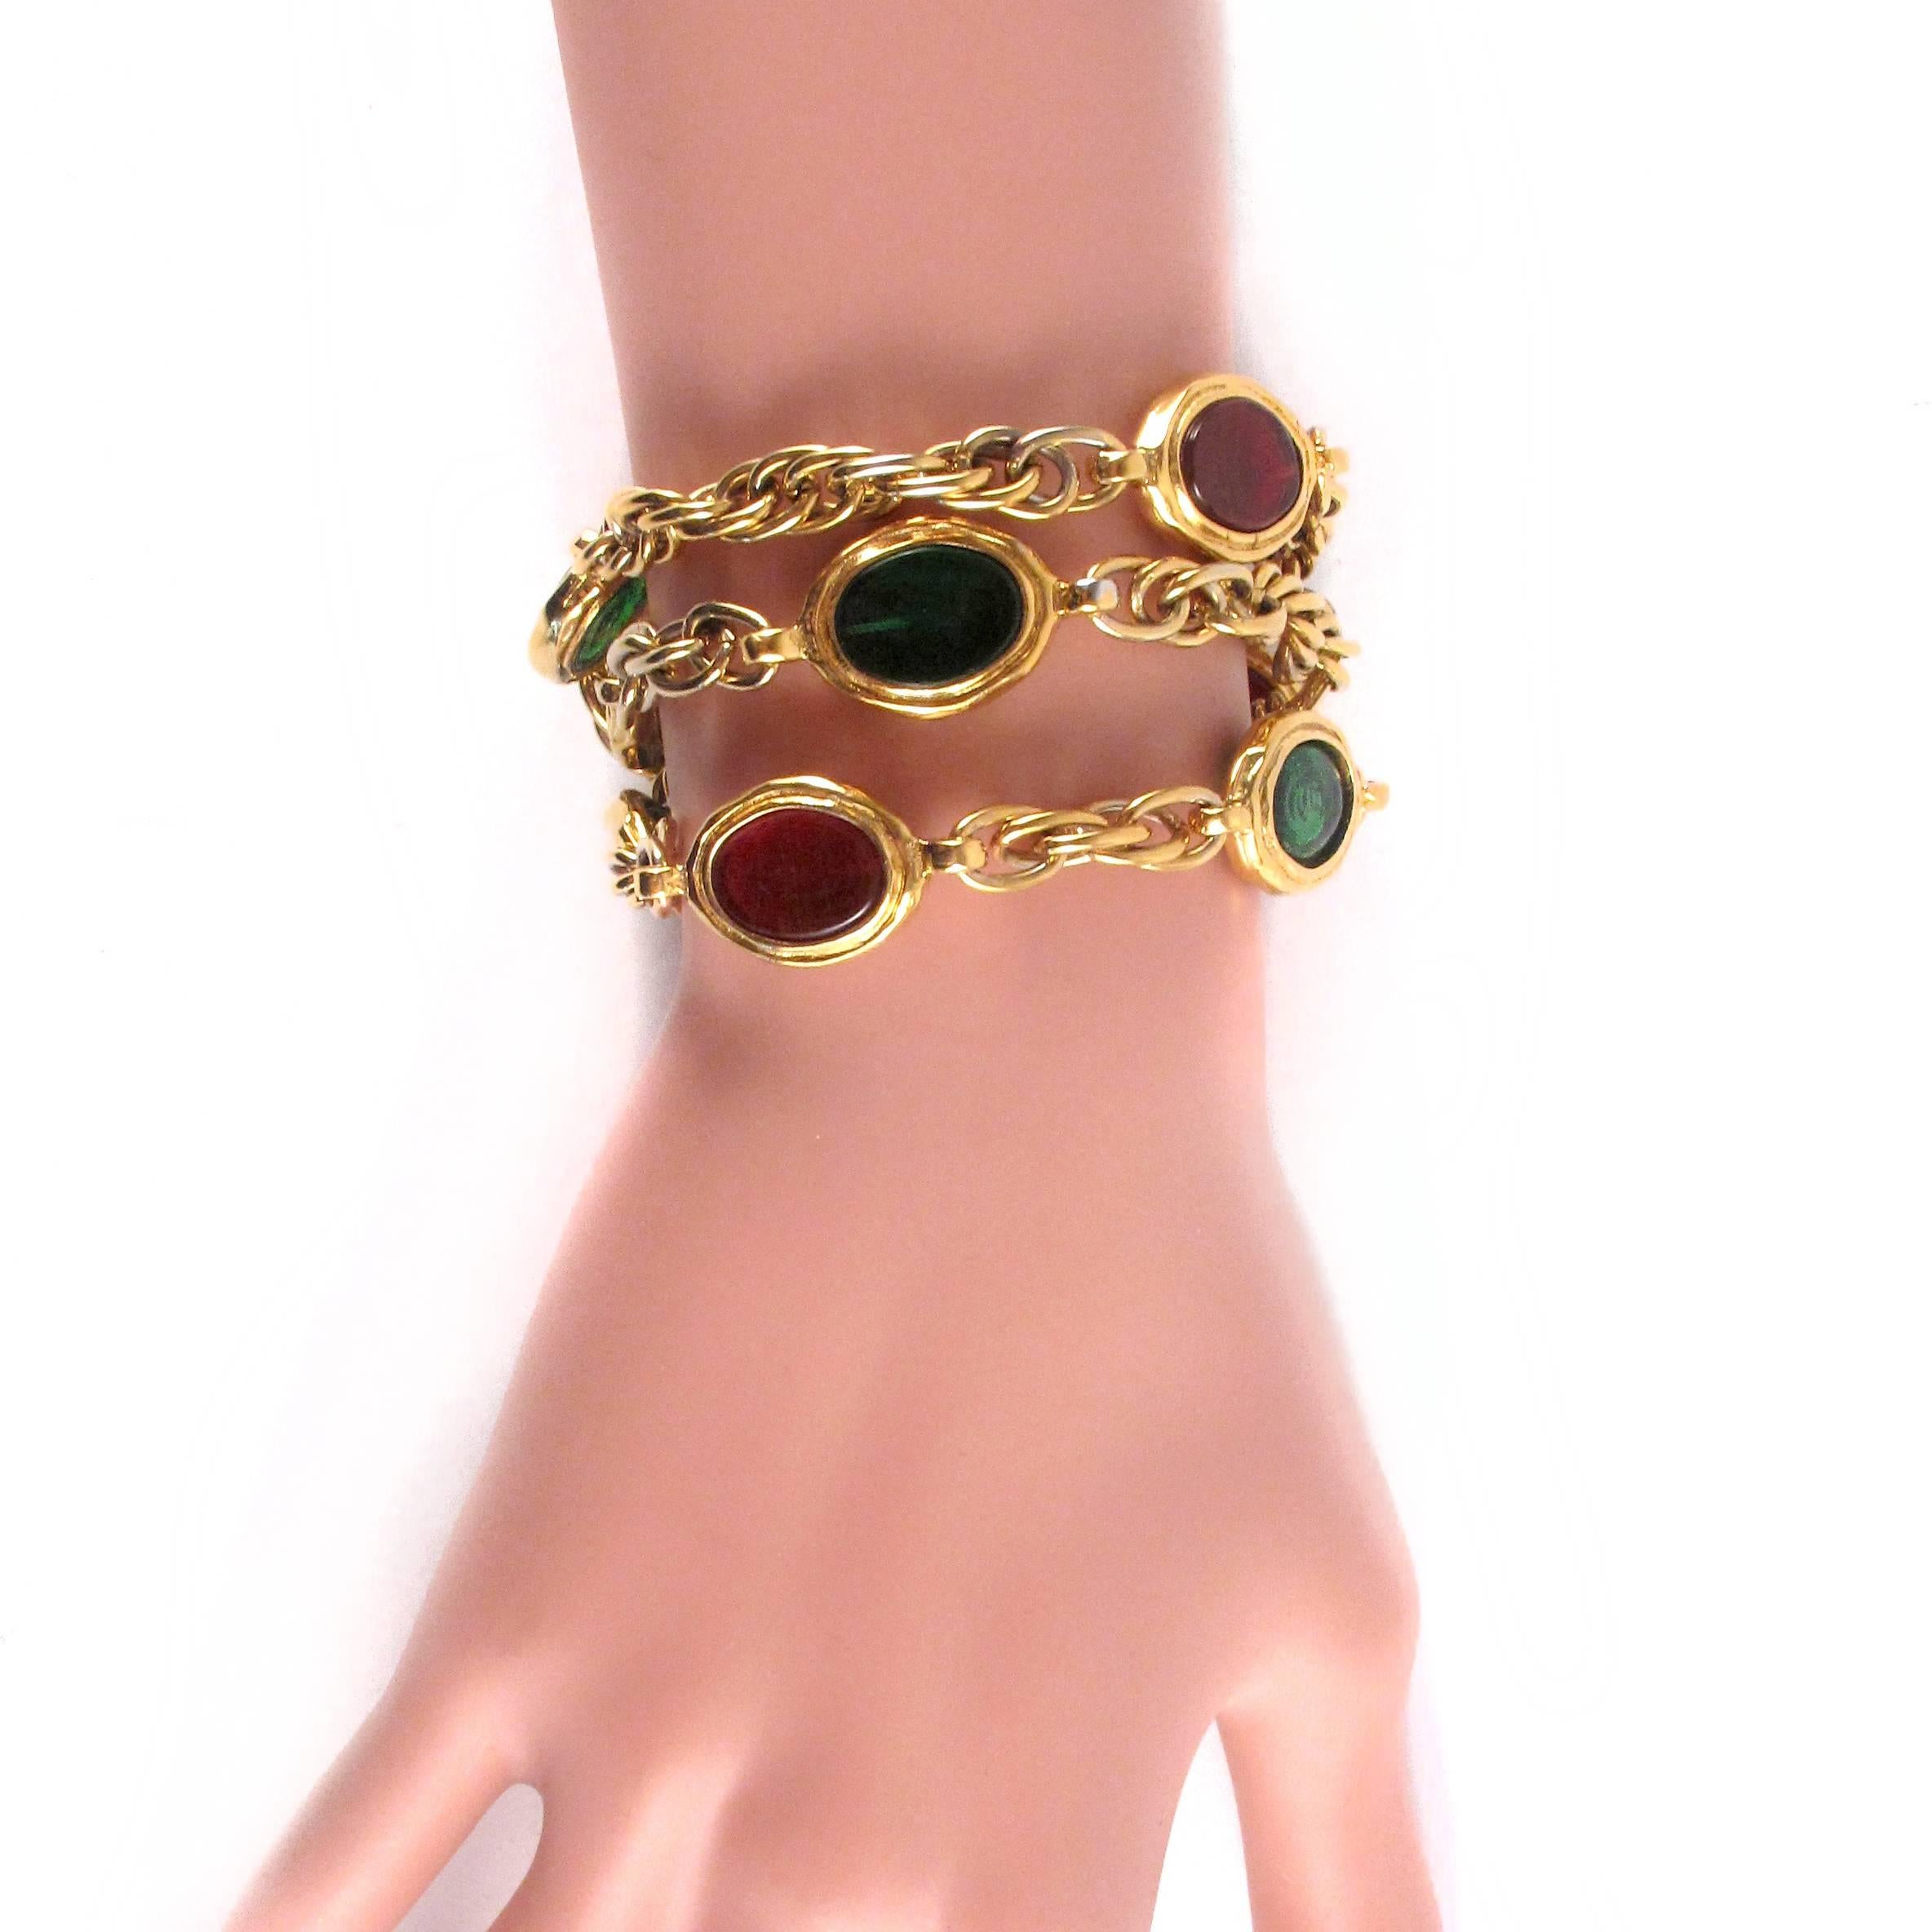 New - Deadstock Vintage with Tags

Chanel - Vintage Gripoix Bracelet

Color: Gold

Material: Metal

------------------------------------------------------------

Details:

- gold tone hardware

- green & red glass beads throughout

-